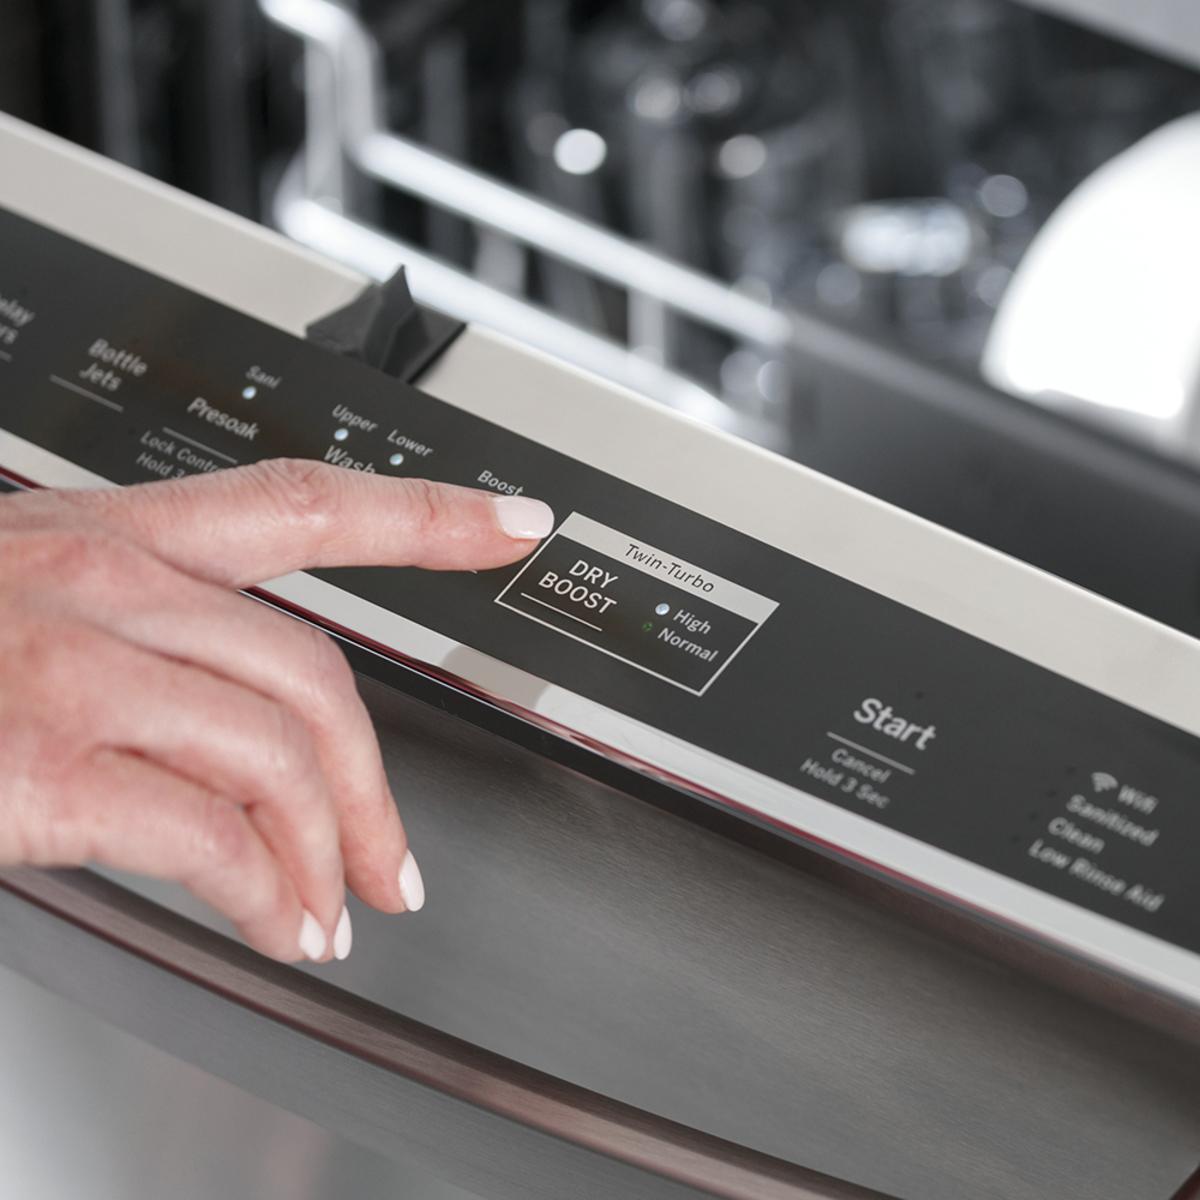 GE Profile 24-inch Built-In Dishwasher PDT785SYNFS